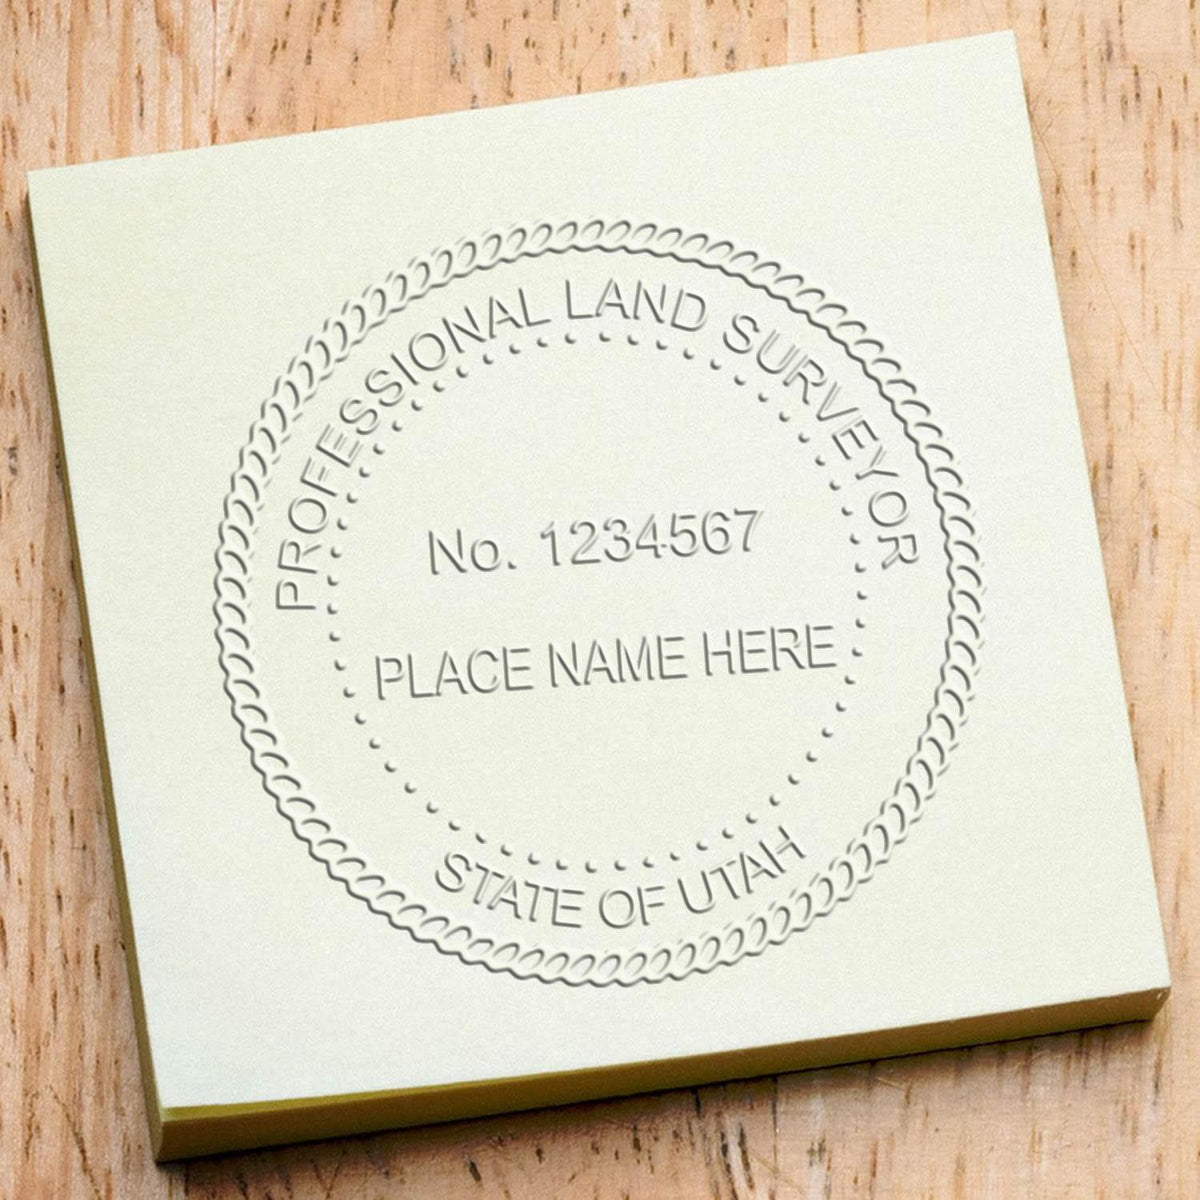 An in use photo of the Hybrid Utah Land Surveyor Seal showing a sample imprint on a cardstock